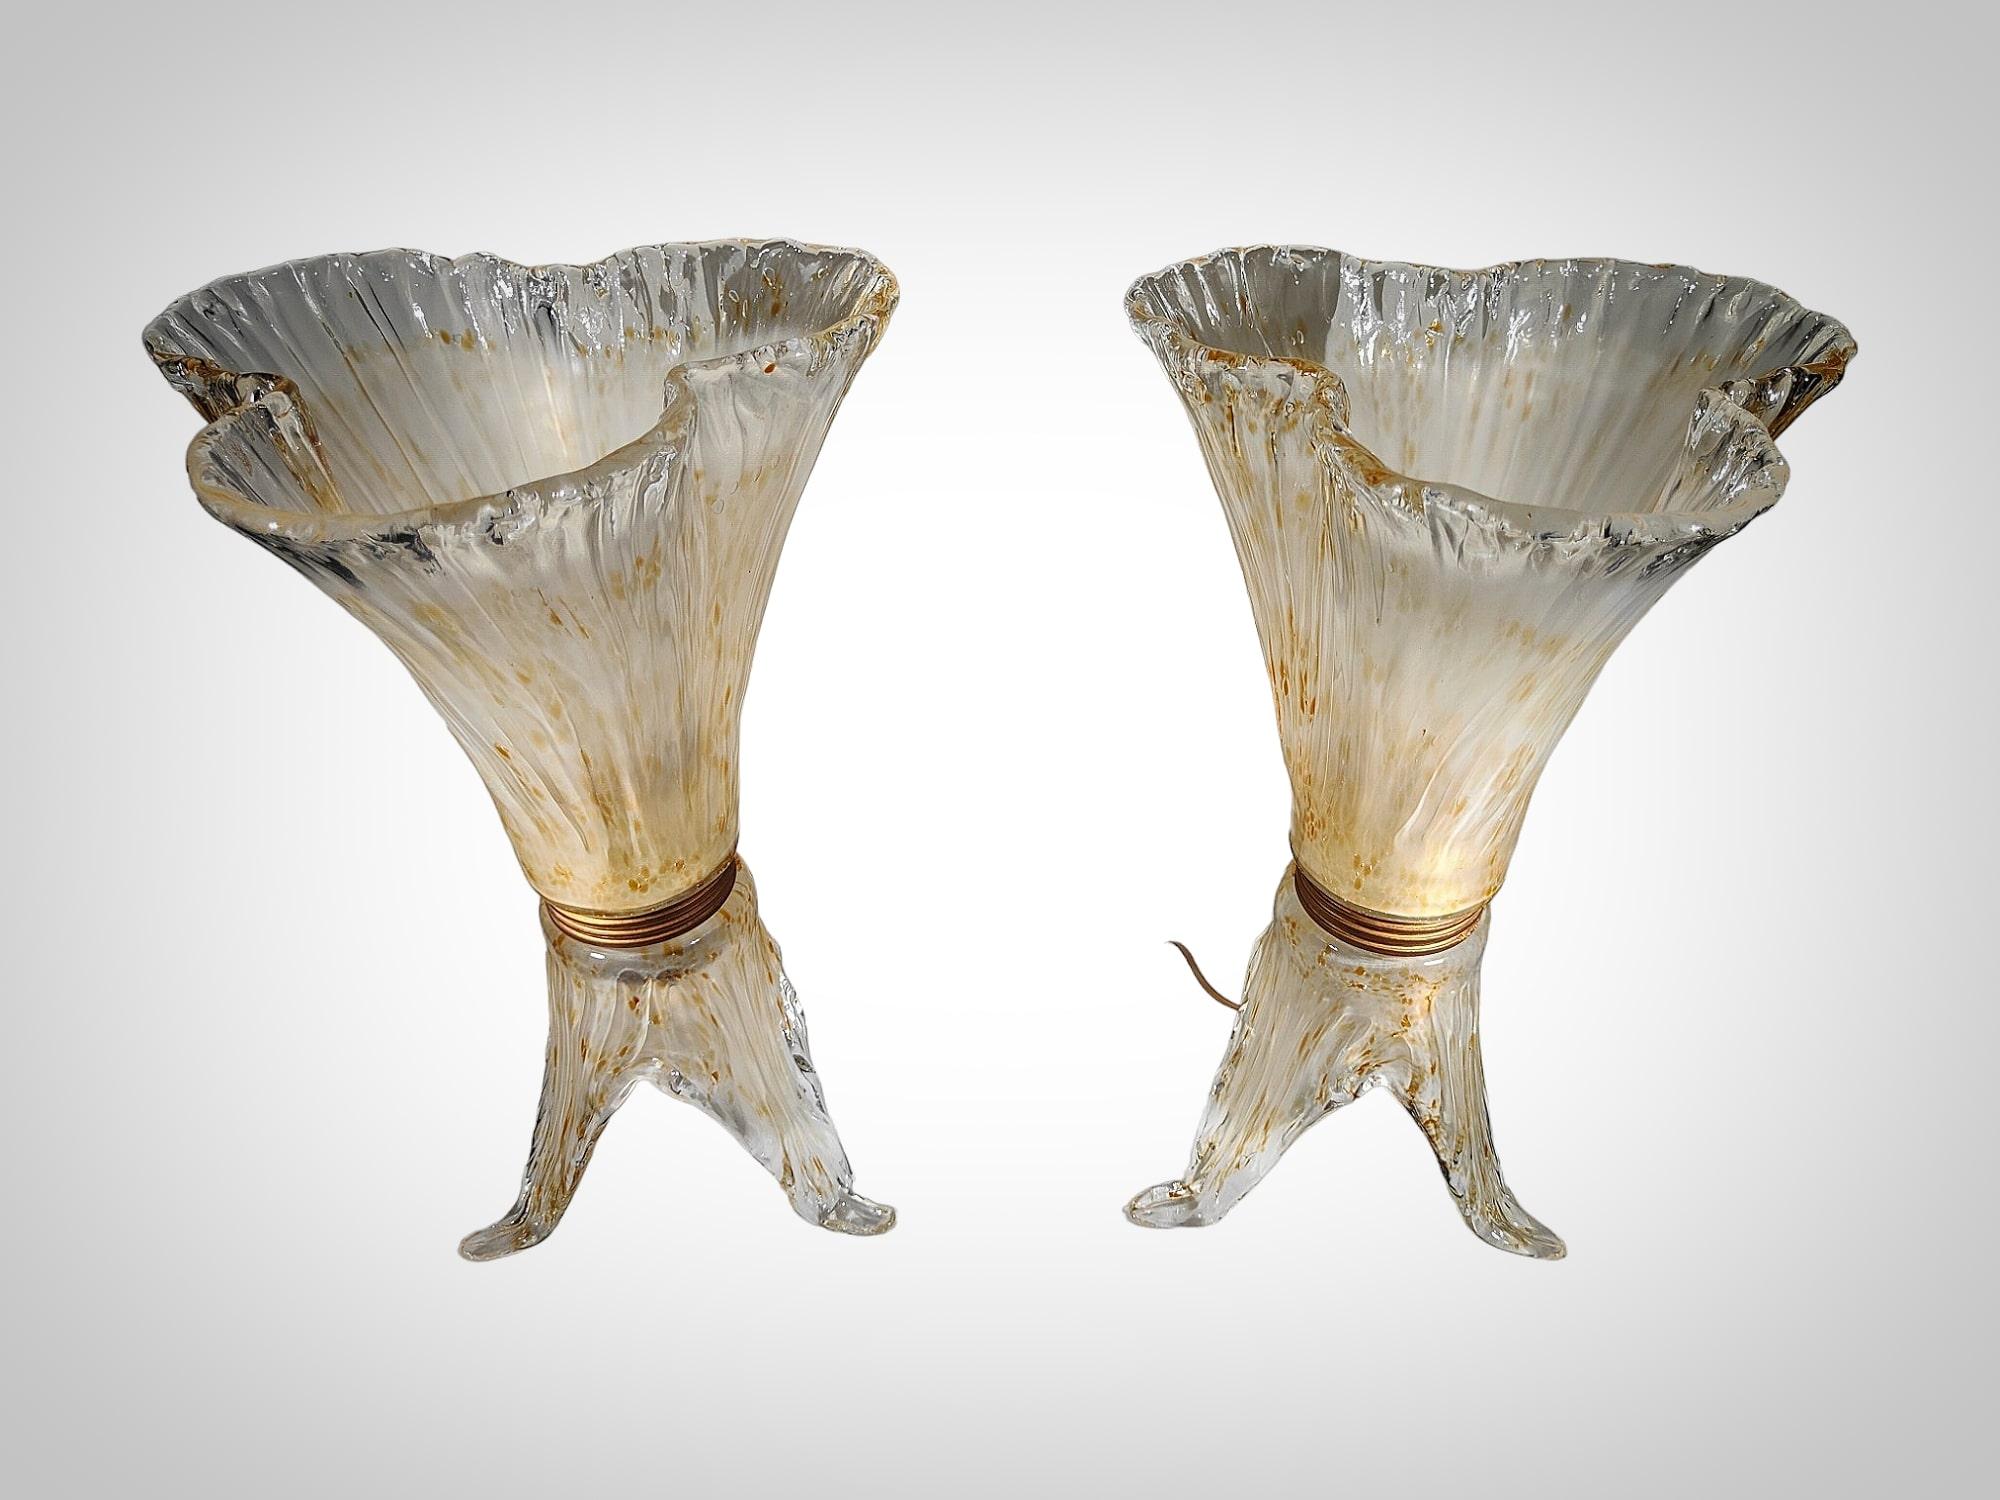 Elegant Pair of Murano Glass Table Lamps - 1970s For Sale 11